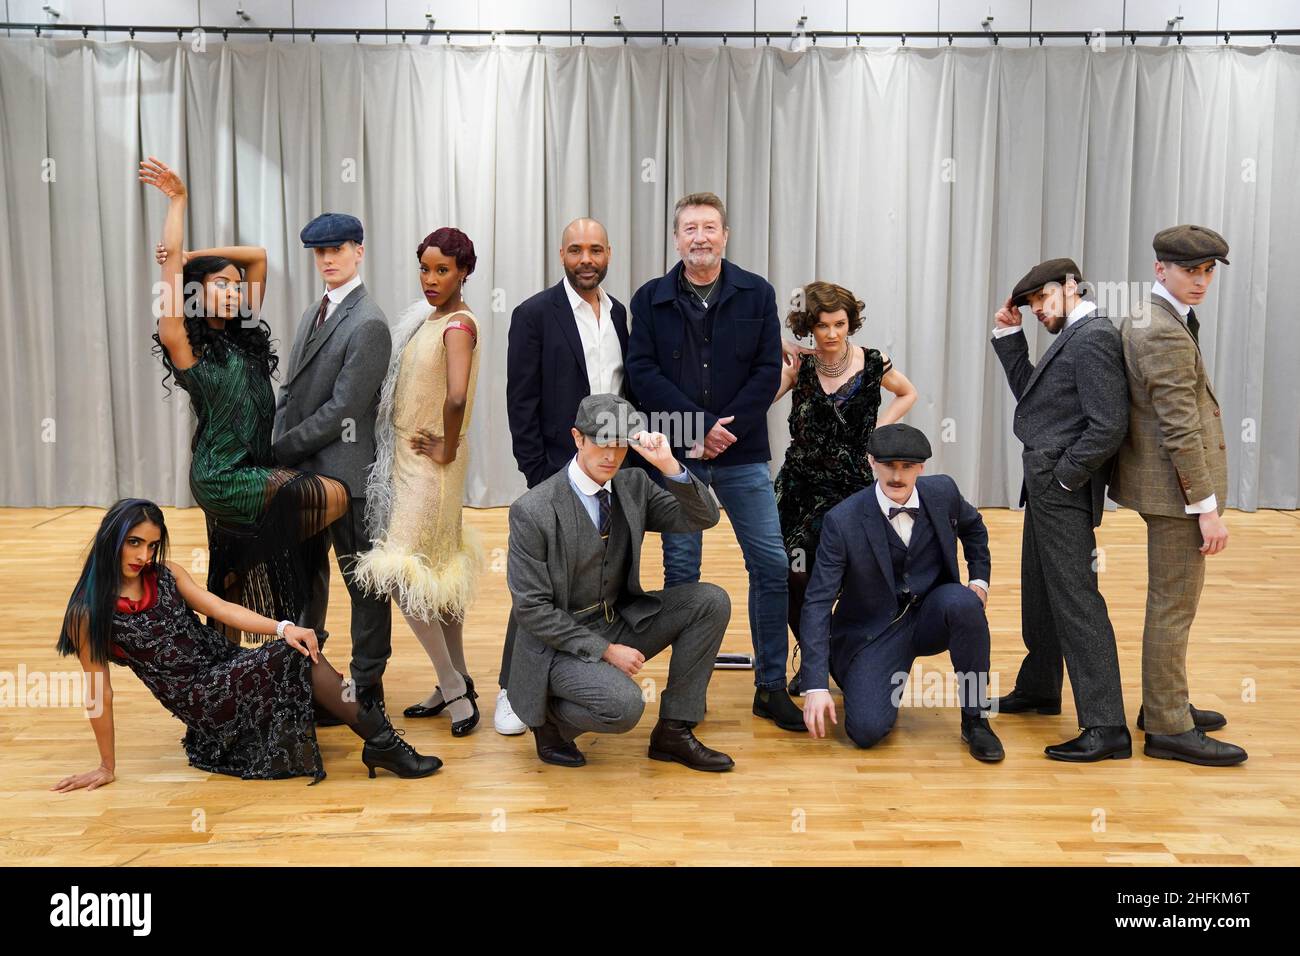 Peaky Blinders creator Steven Knight and Artistic Director of Rambert Benoit Swan Pouffer pose for photographs alongside members of the cast, during the press launch of the Rambert Dance production of Peaky Blinders: The Redemption of Thomas Shelby at the Dance Hub Birmingham. Picture date: Monday January 17, 2022. Stock Photo